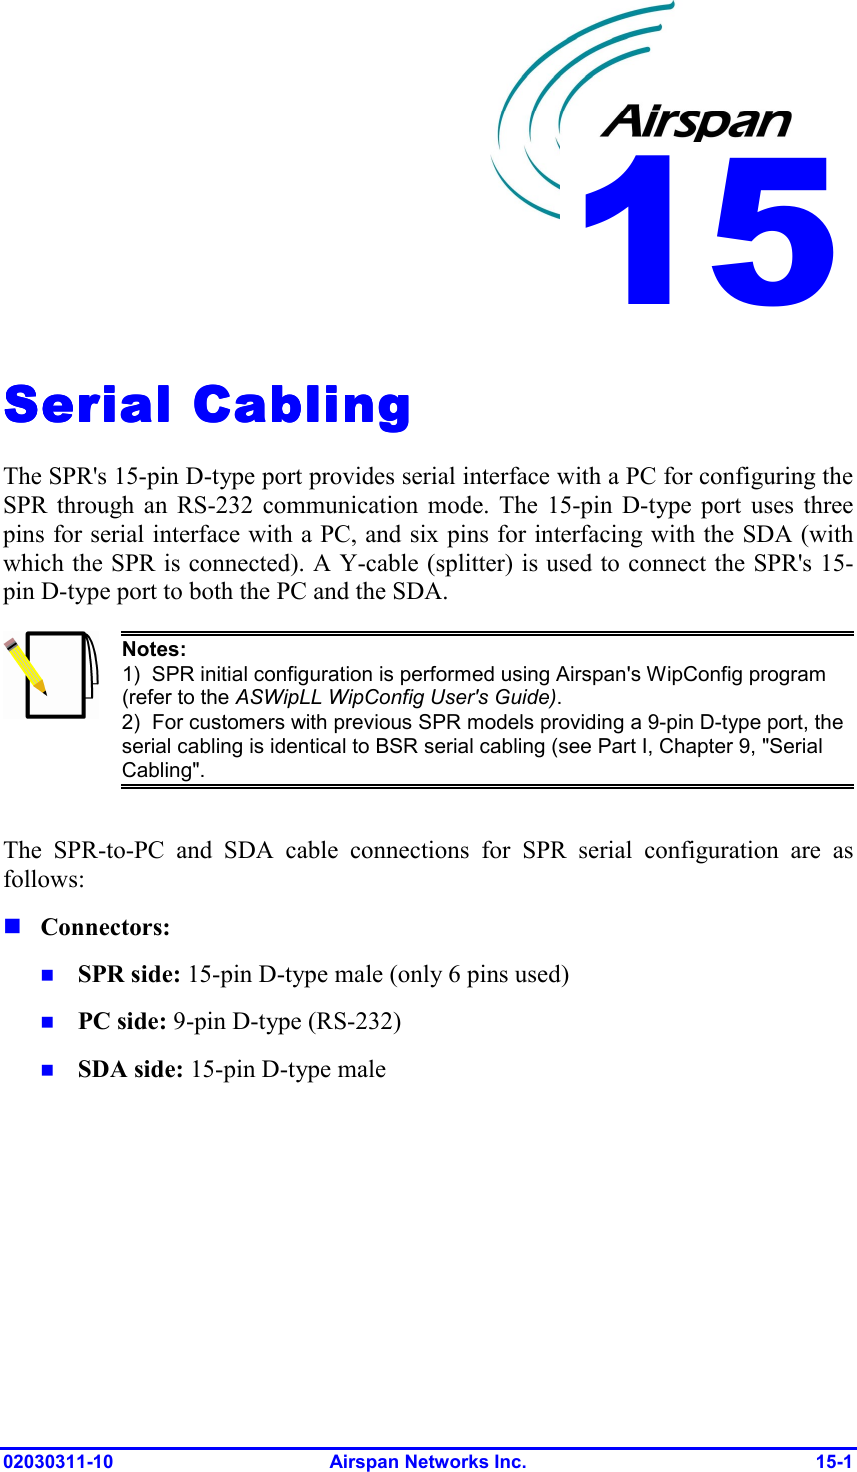  02030311-10 Airspan Networks Inc.  15-1 Serial CablingSerial CablingSerial CablingSerial Cabling    The SPR&apos;s 15-pin D-type port provides serial interface with a PC for configuring the SPR through an RS-232 communication mode. The 15-pin D-type port uses three pins for serial interface with a PC, and six pins for interfacing with the SDA (with which the SPR is connected). A Y-cable (splitter) is used to connect the SPR&apos;s 15-pin D-type port to both the PC and the SDA.  Notes: 1)  SPR initial configuration is performed using Airspan&apos;s WipConfig program (refer to the ASWipLL WipConfig User&apos;s Guide). 2)  For customers with previous SPR models providing a 9-pin D-type port, the serial cabling is identical to BSR serial cabling (see Part I, Chapter 9, &quot;Serial Cabling&quot;.  The SPR-to-PC and SDA cable connections for SPR serial configuration are as follows:  Connectors:  SPR side: 15-pin D-type male (only 6 pins used)  PC side: 9-pin D-type (RS-232)  SDA side: 15-pin D-type male 15